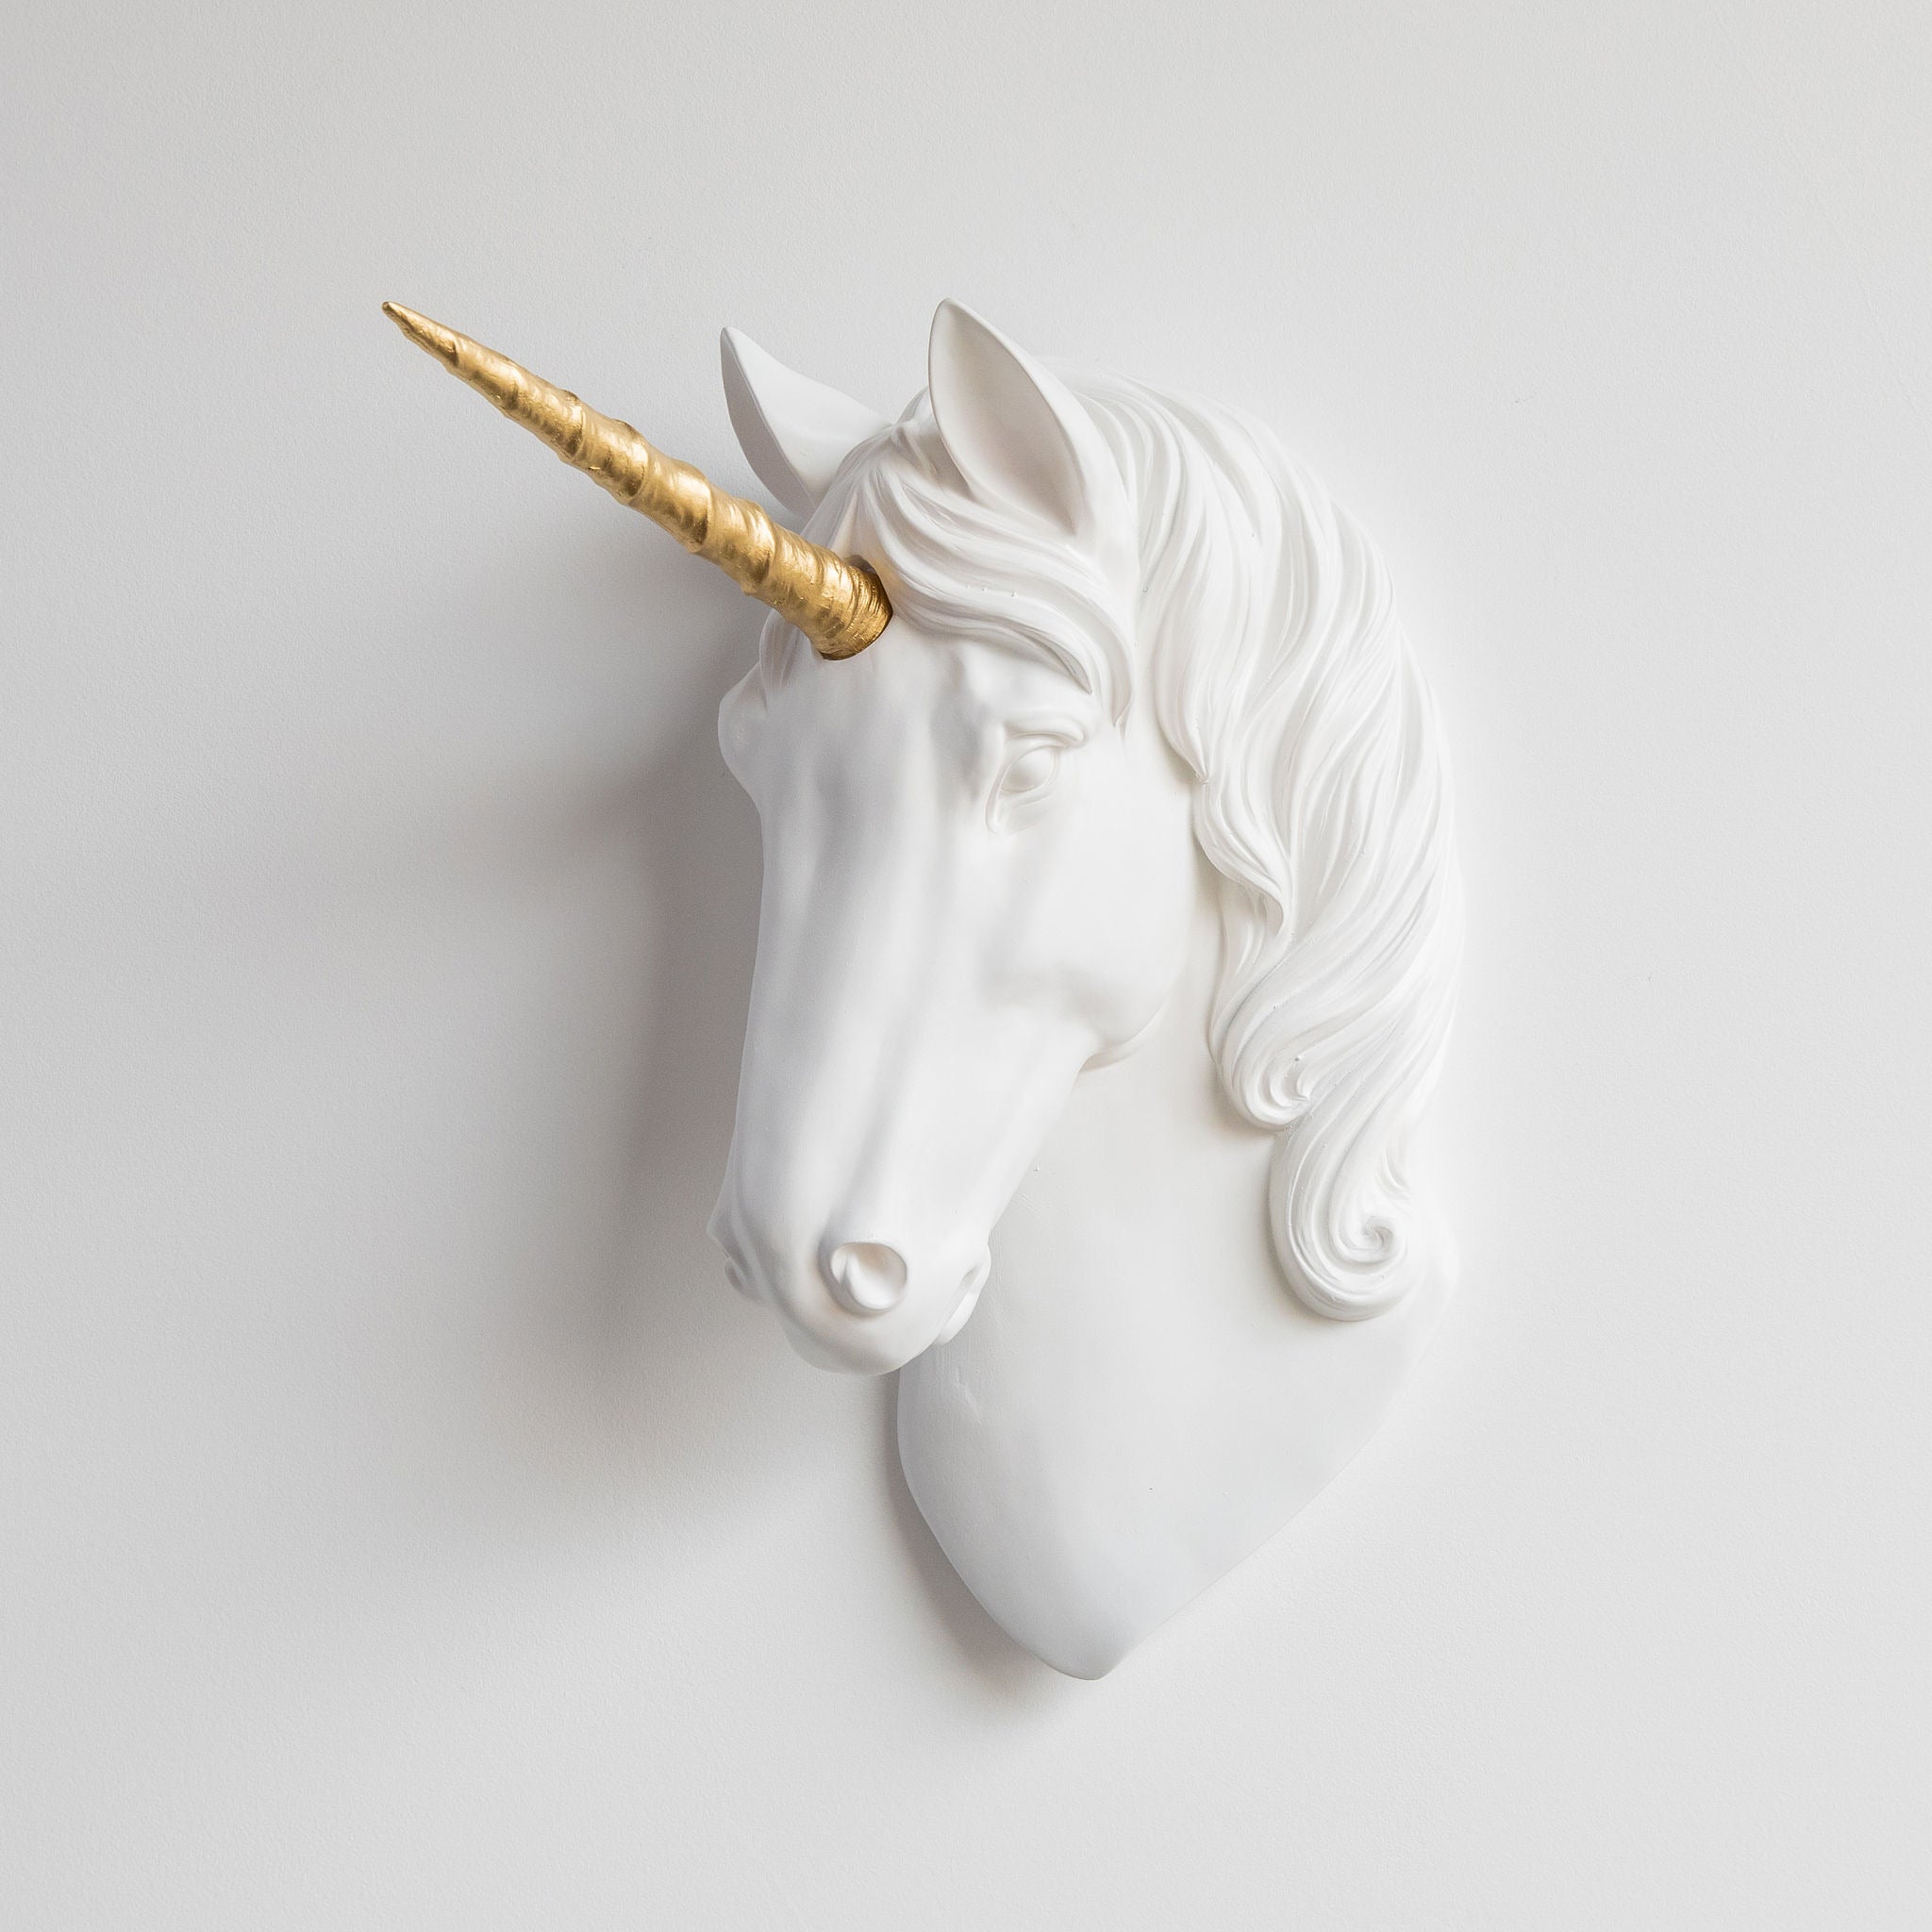 Faux Unicorn Wall Plaque // White and Gold